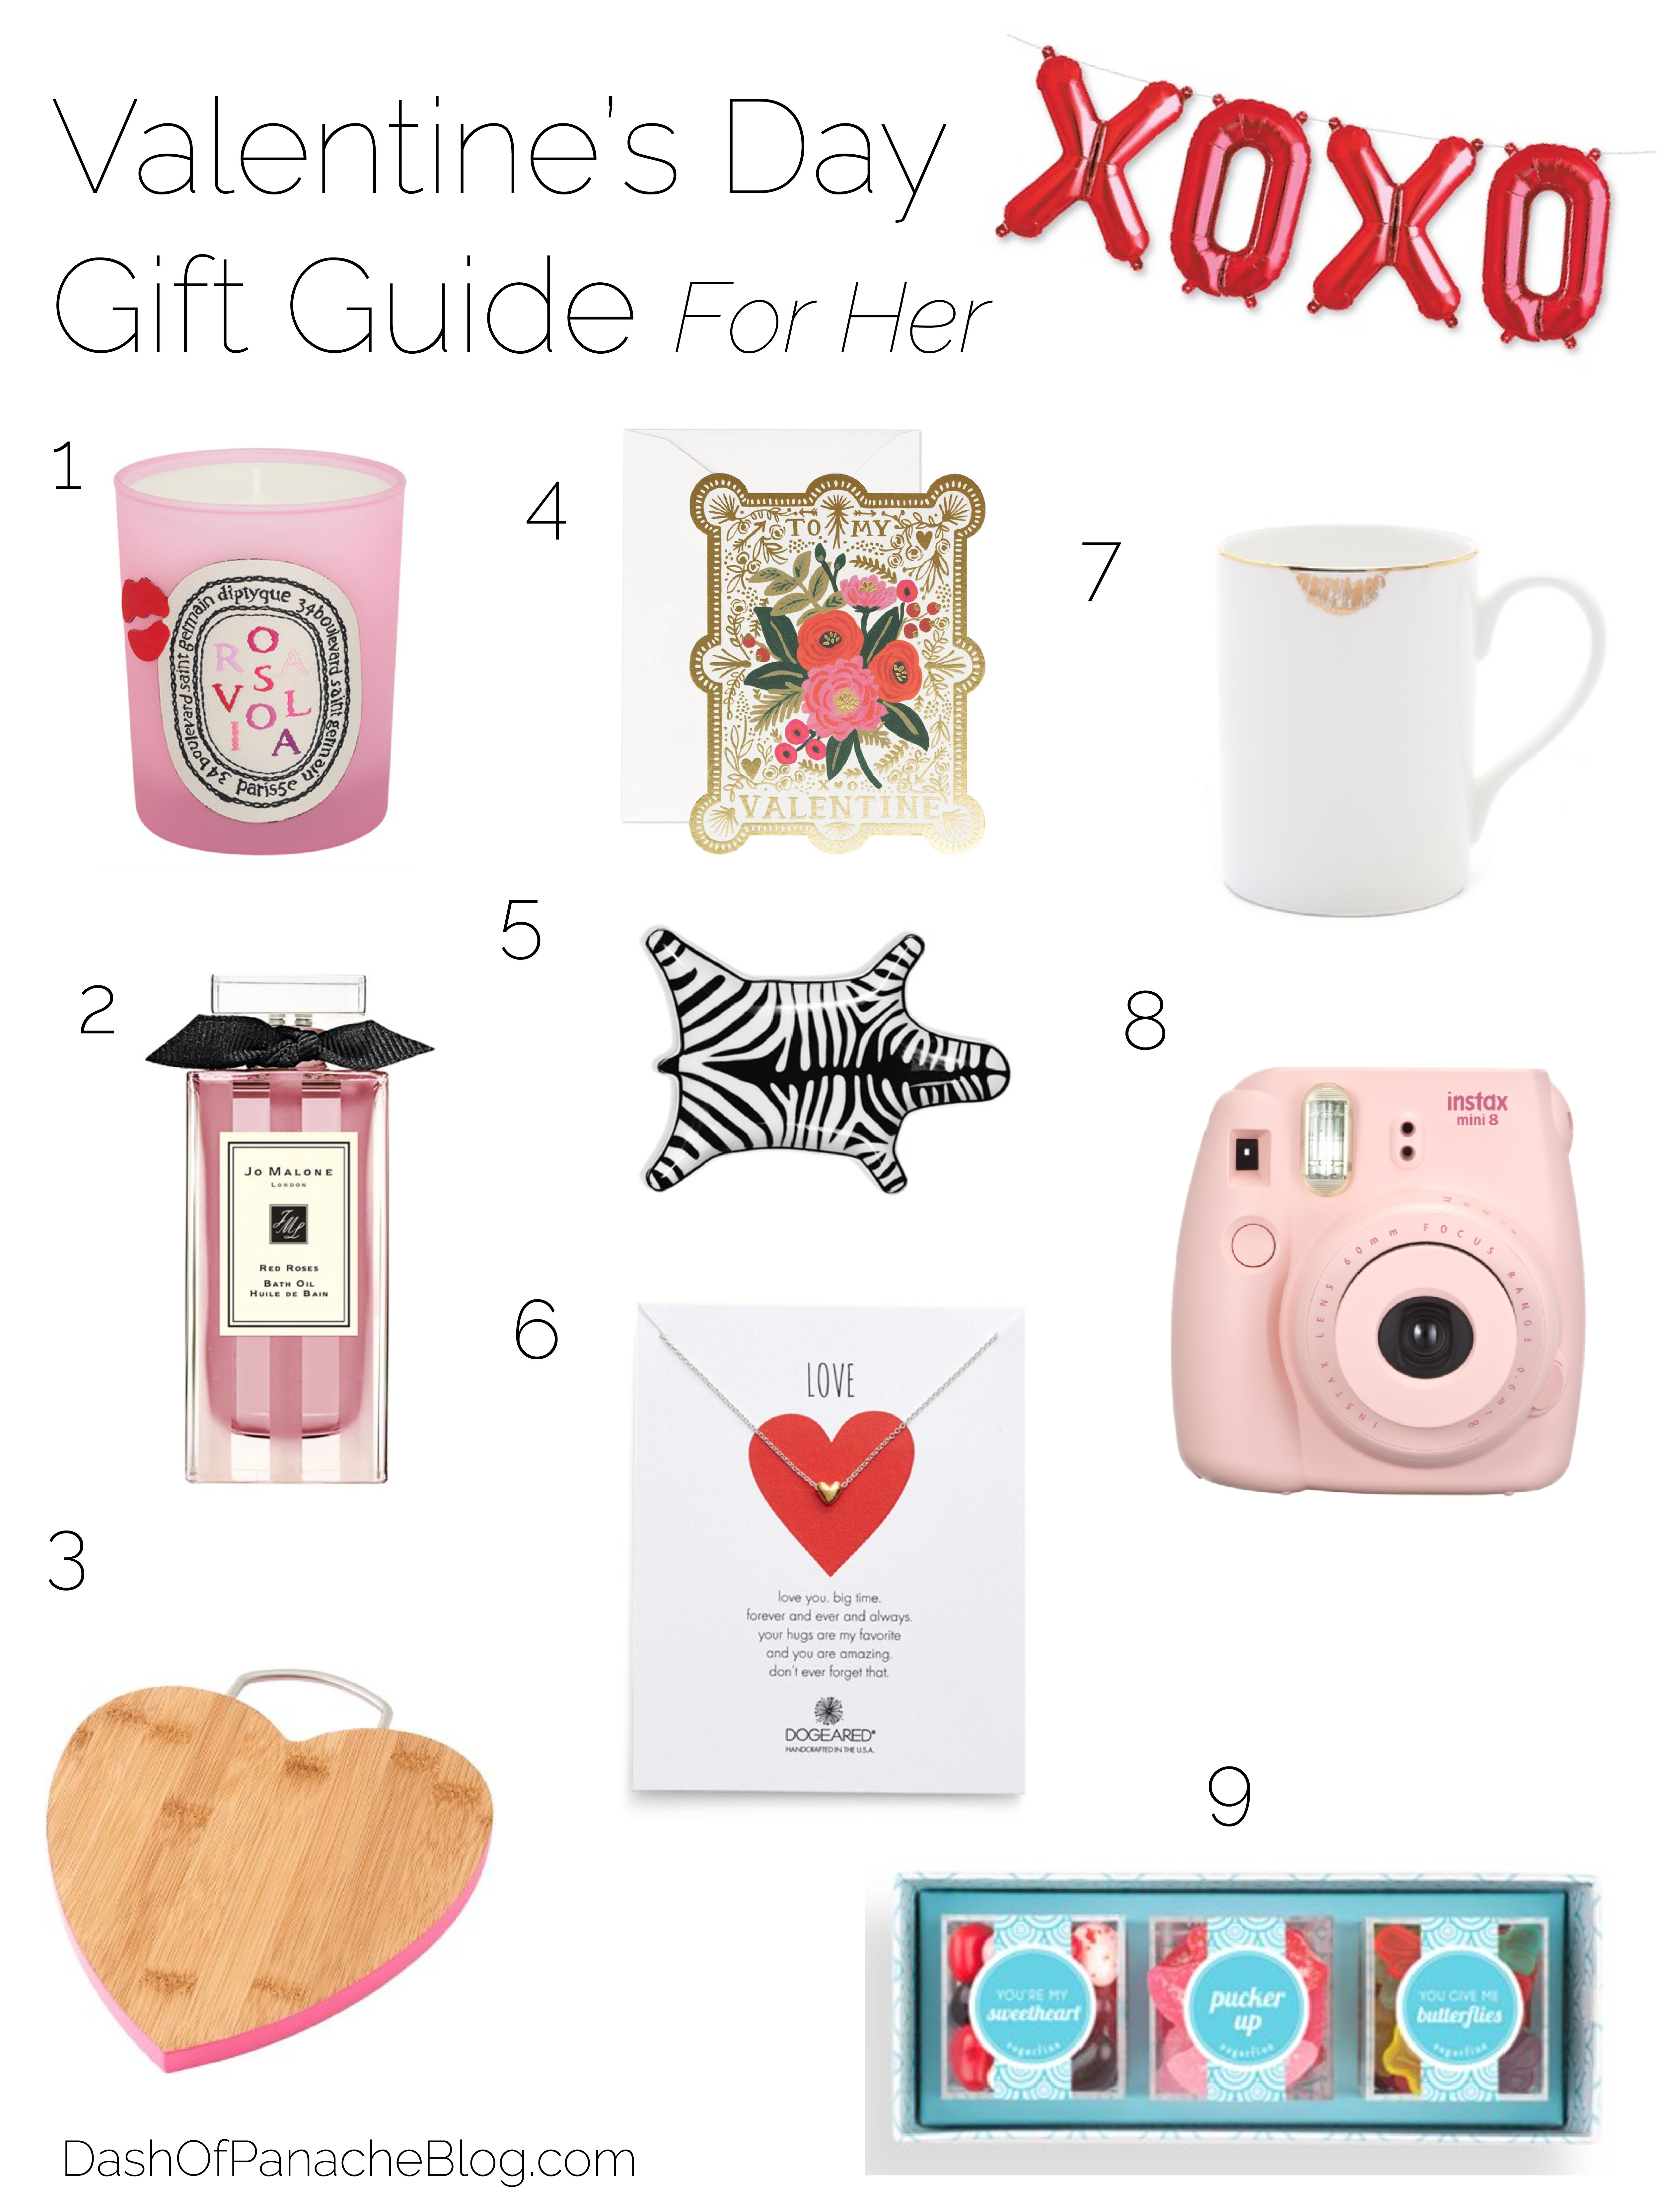 Valentines day gift ideas - gift s for her - miami lifestyle blogger